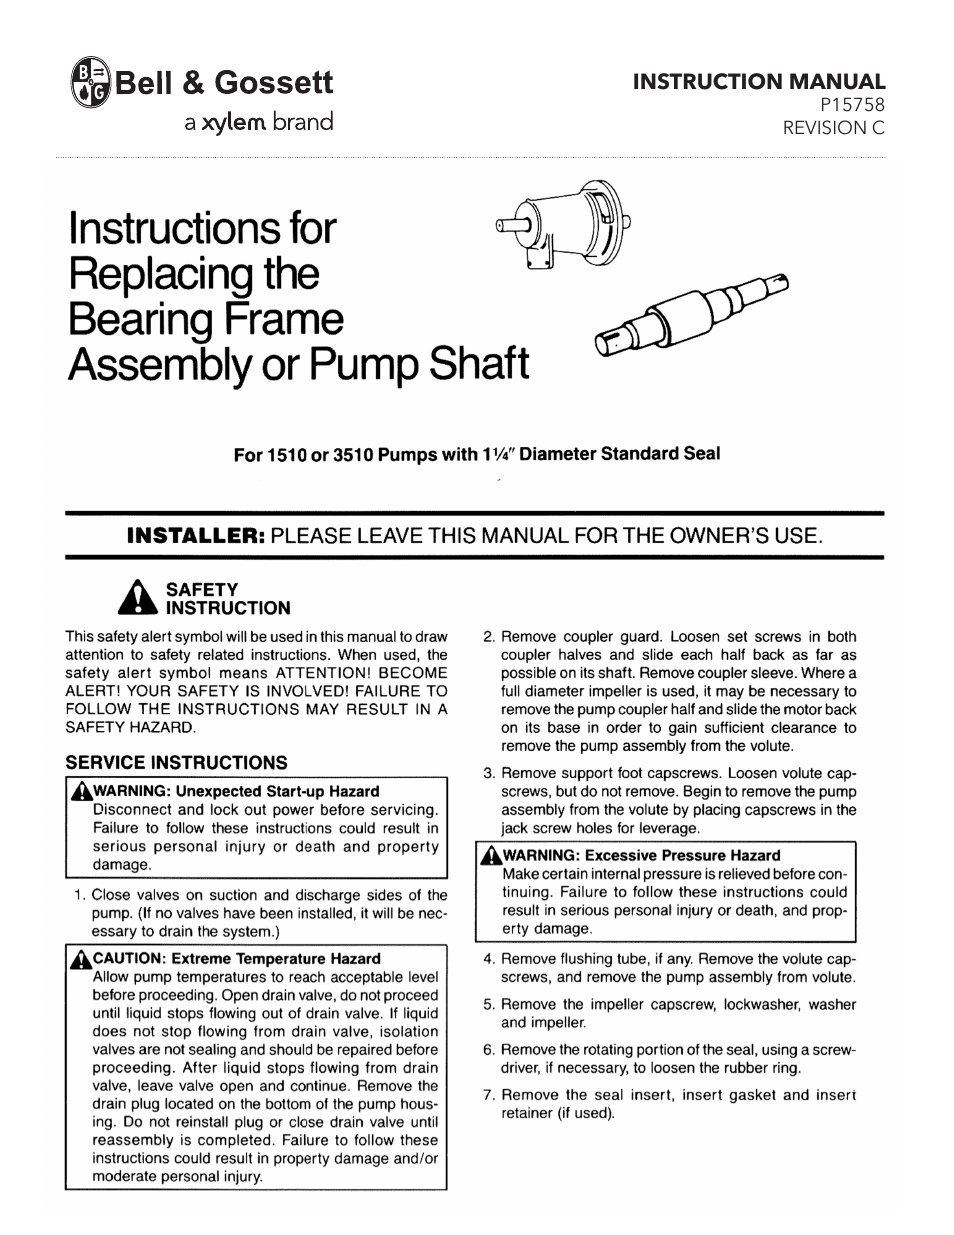 P15758C Replacing the Bearing Frame Assembly or Pump Shaft